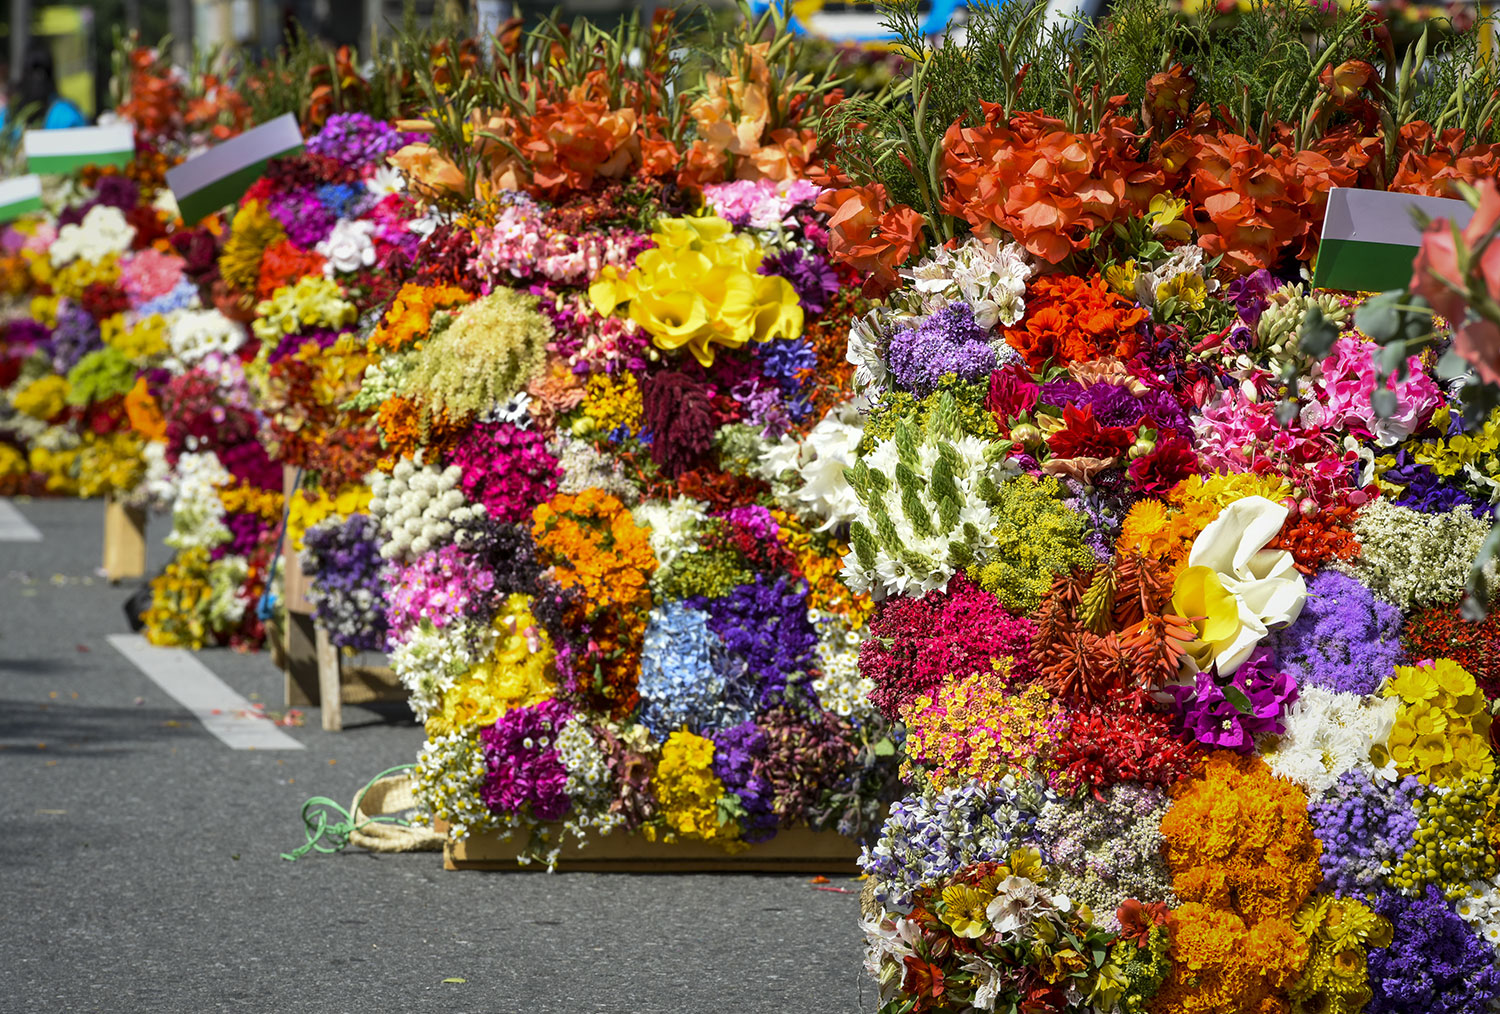 Satisfy Your Wanderlust with The World's Most Fantastical Flower